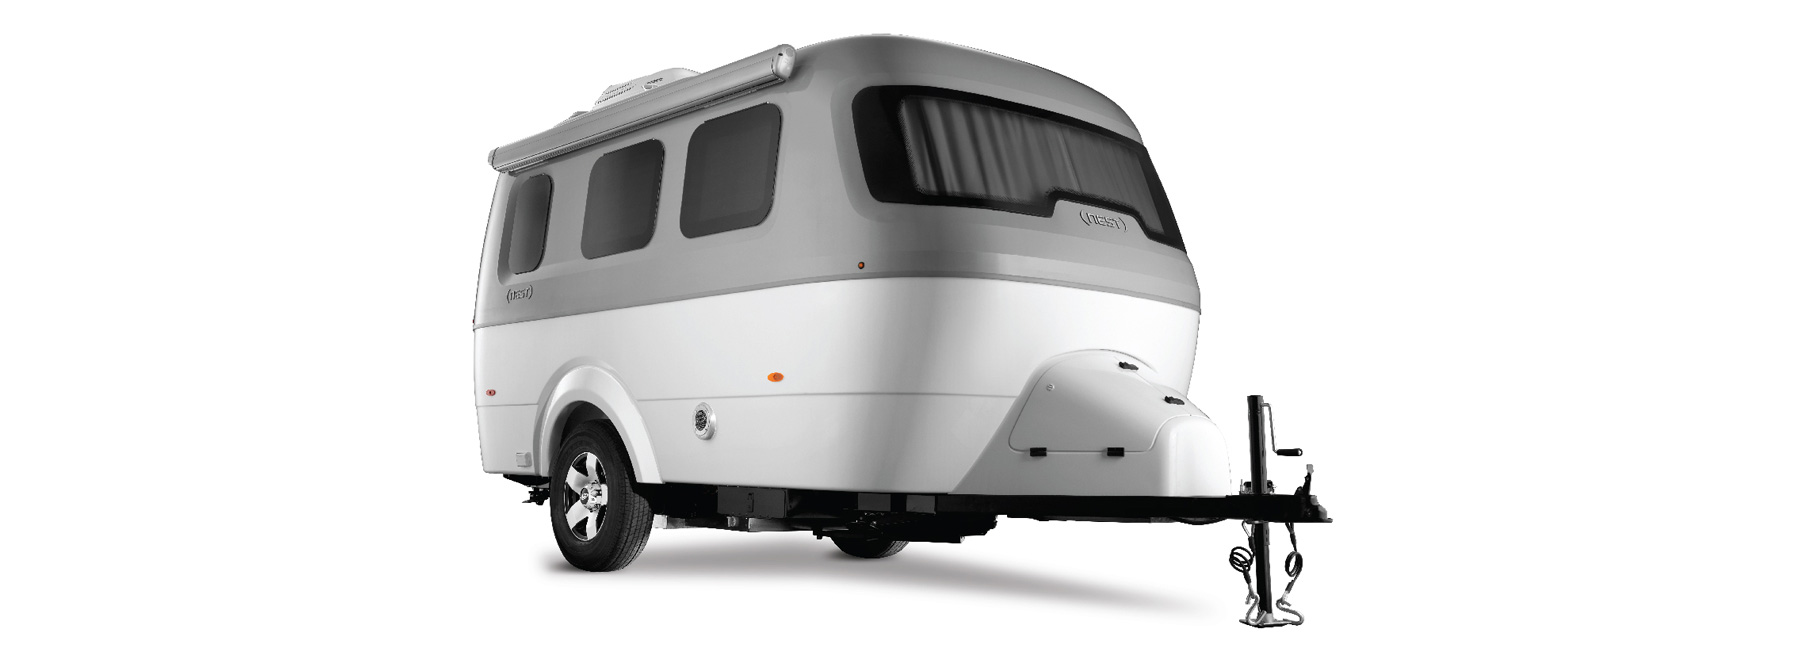 Airstream S Futuristic Baby Trailer Is A Luxury Nest Inside